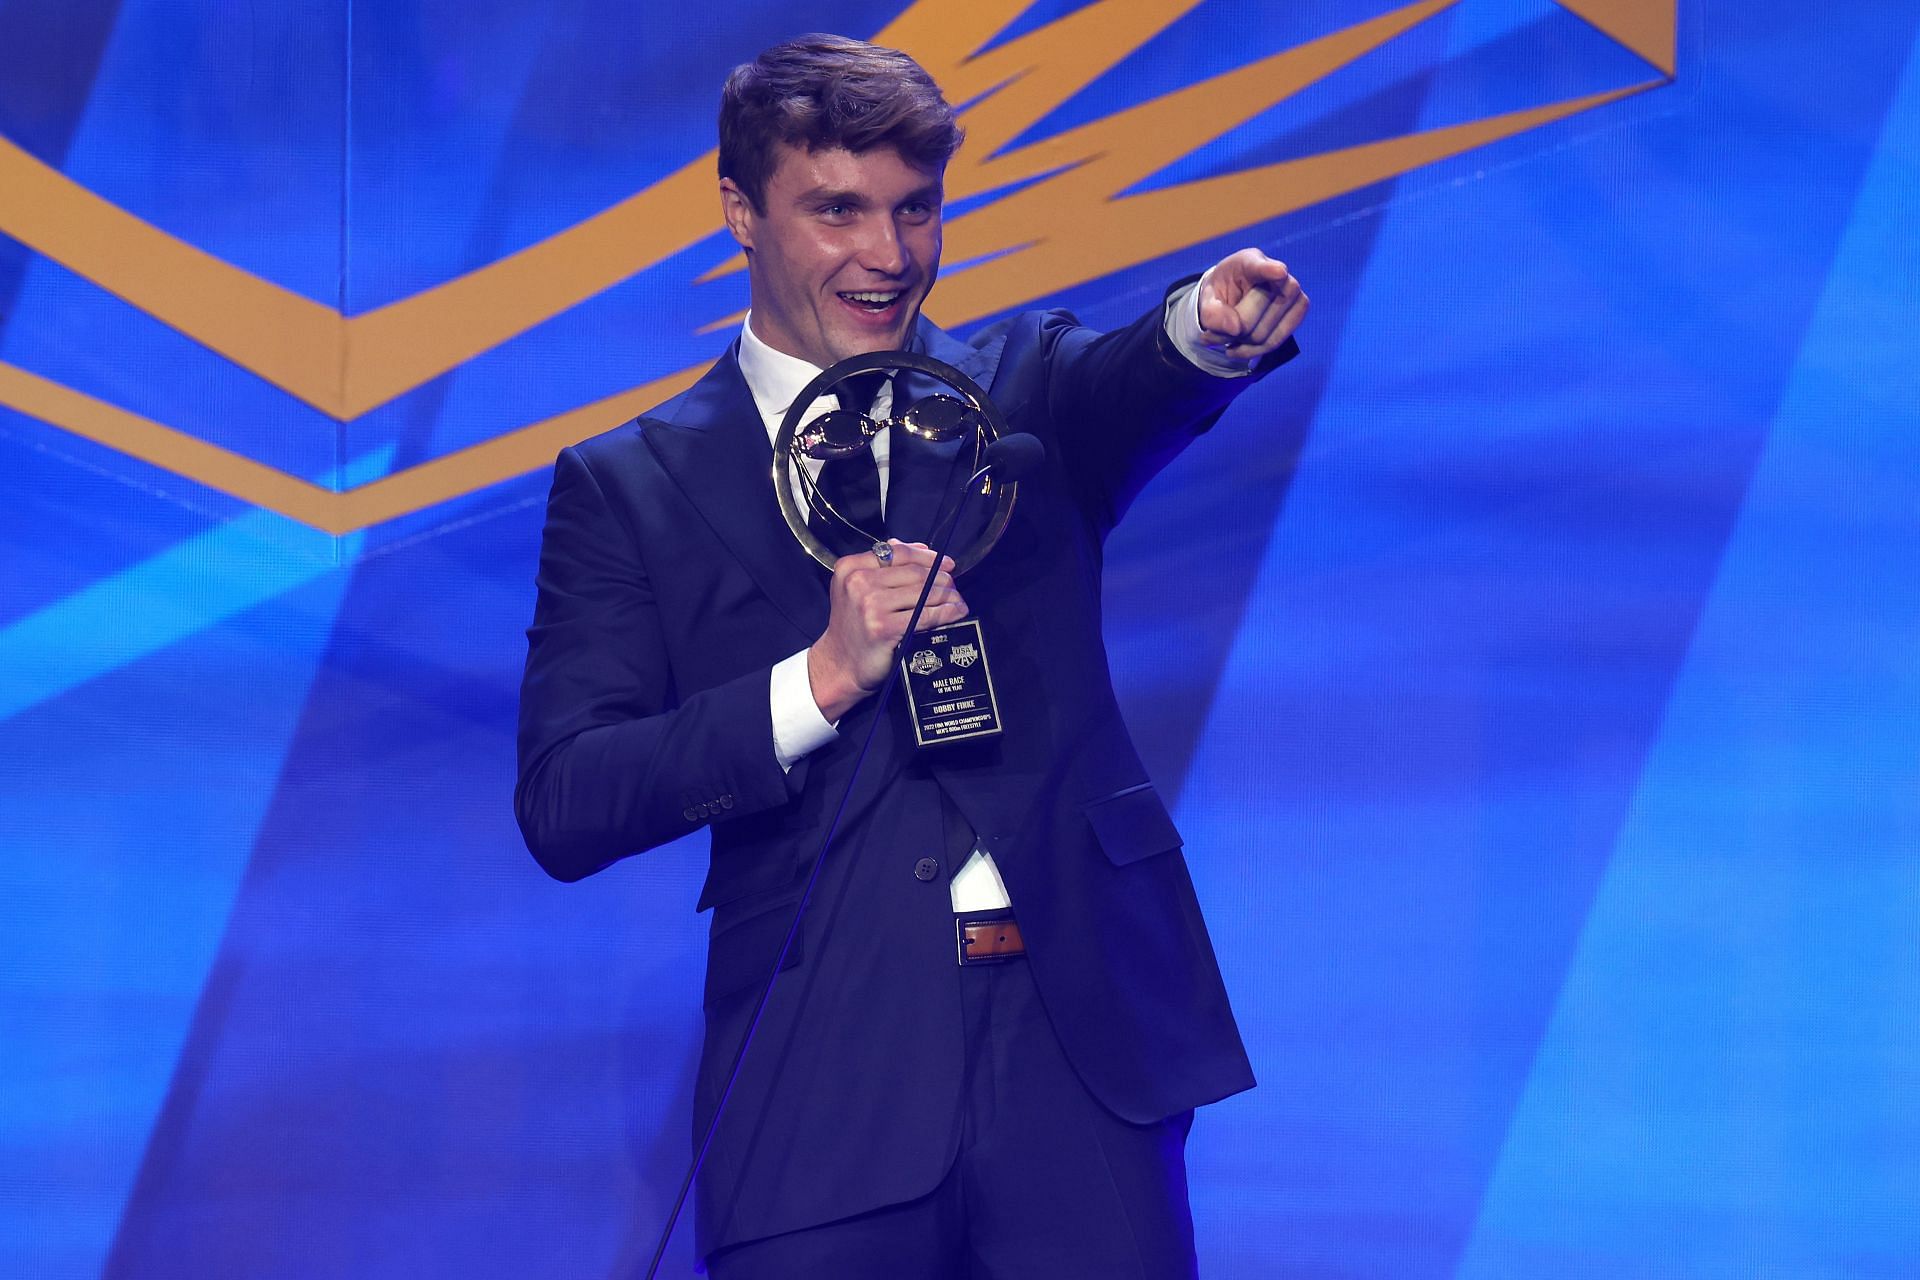 Swimmer Bobby Finke speaks after receiving the Male Race of the Year award during the 2022 Golden Goggle Awards